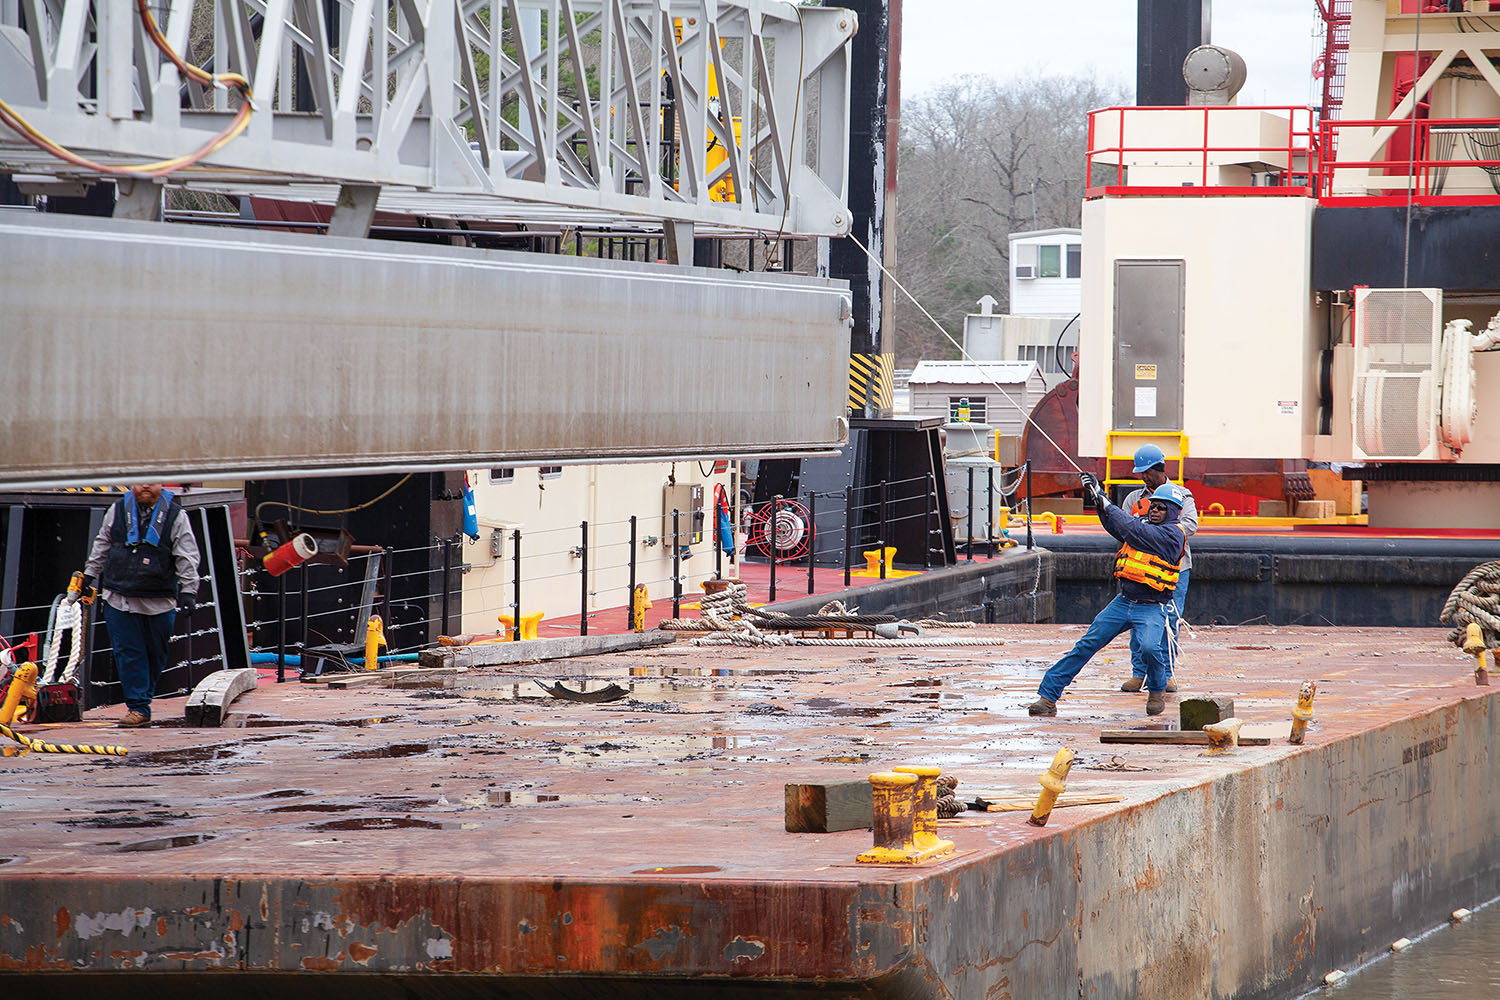 Corps of Engineers crews had to remove and reset stoplogs at Demopolis Lock last week to position vessels for the repair project, which is expected to last until May. (Photo by Frank McCormack)